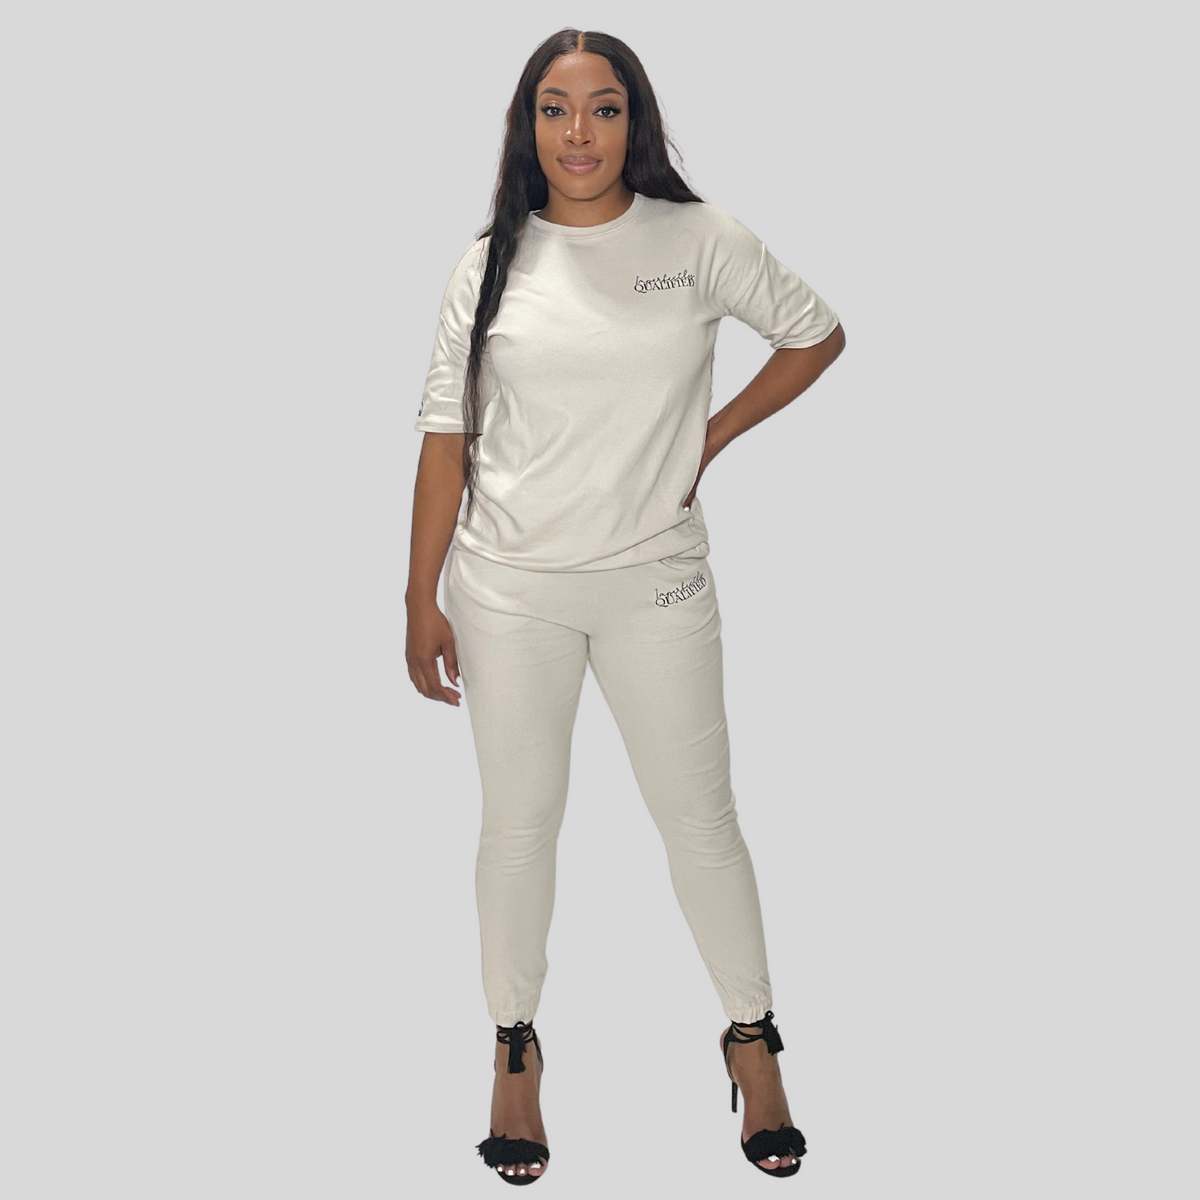 Ladies Essential Set, Inspirational Apparel, ImperfectlyQualified